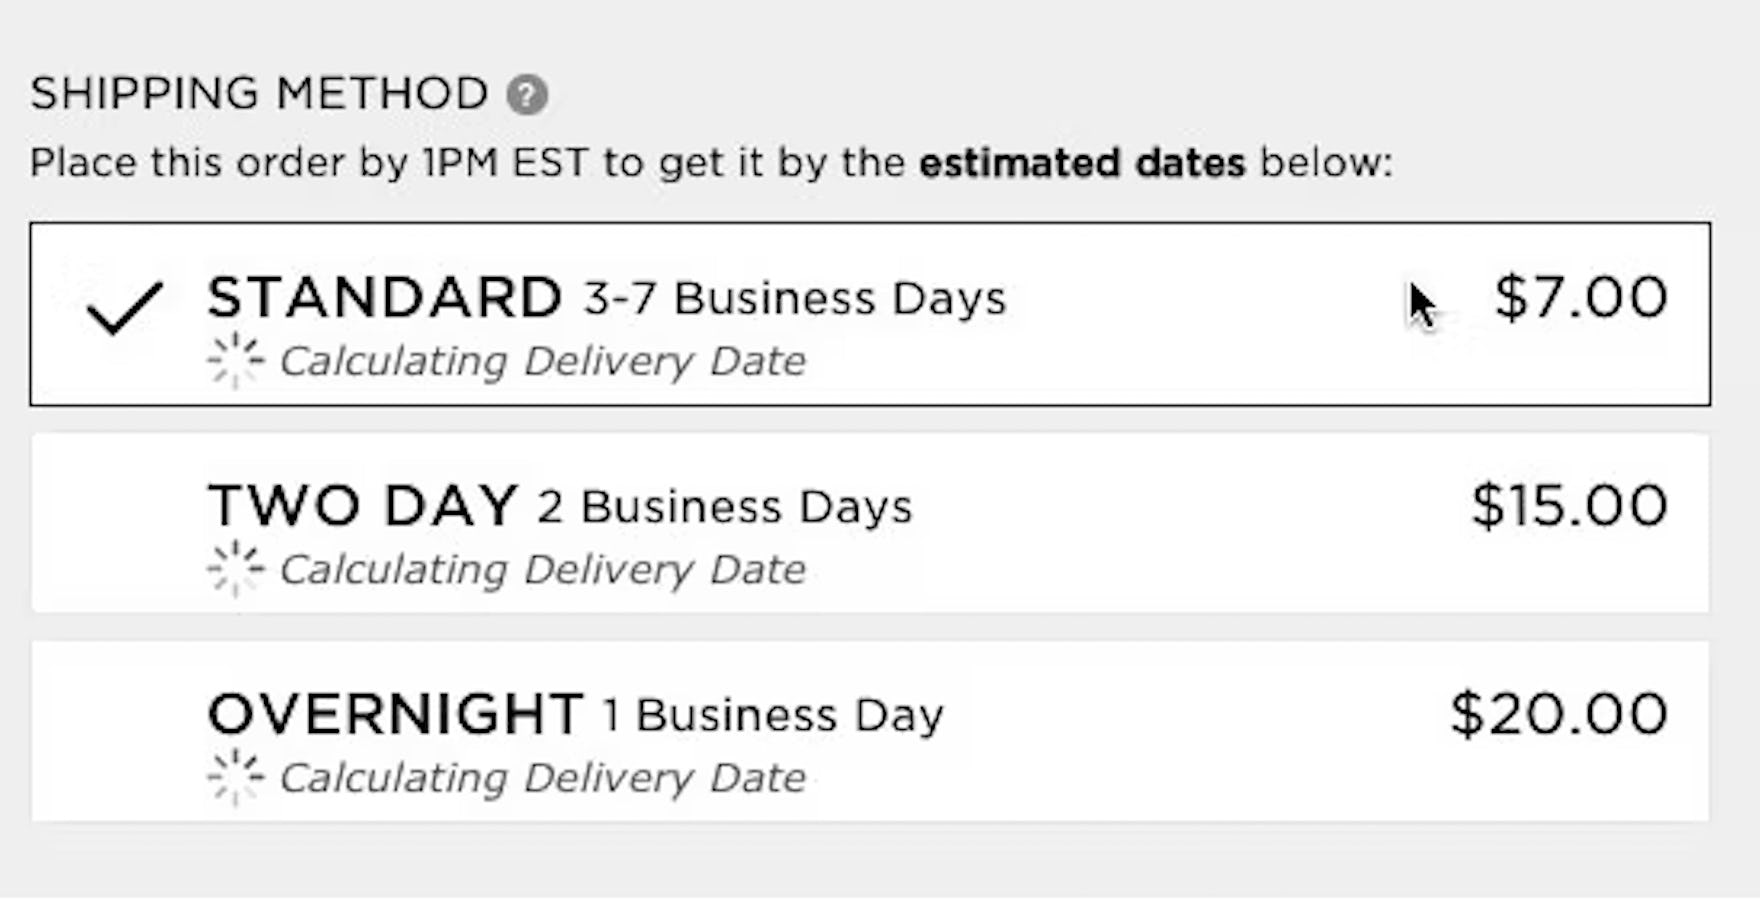 Ship Date vs. Delivery Date: 6 Important Shipping Dates to Know